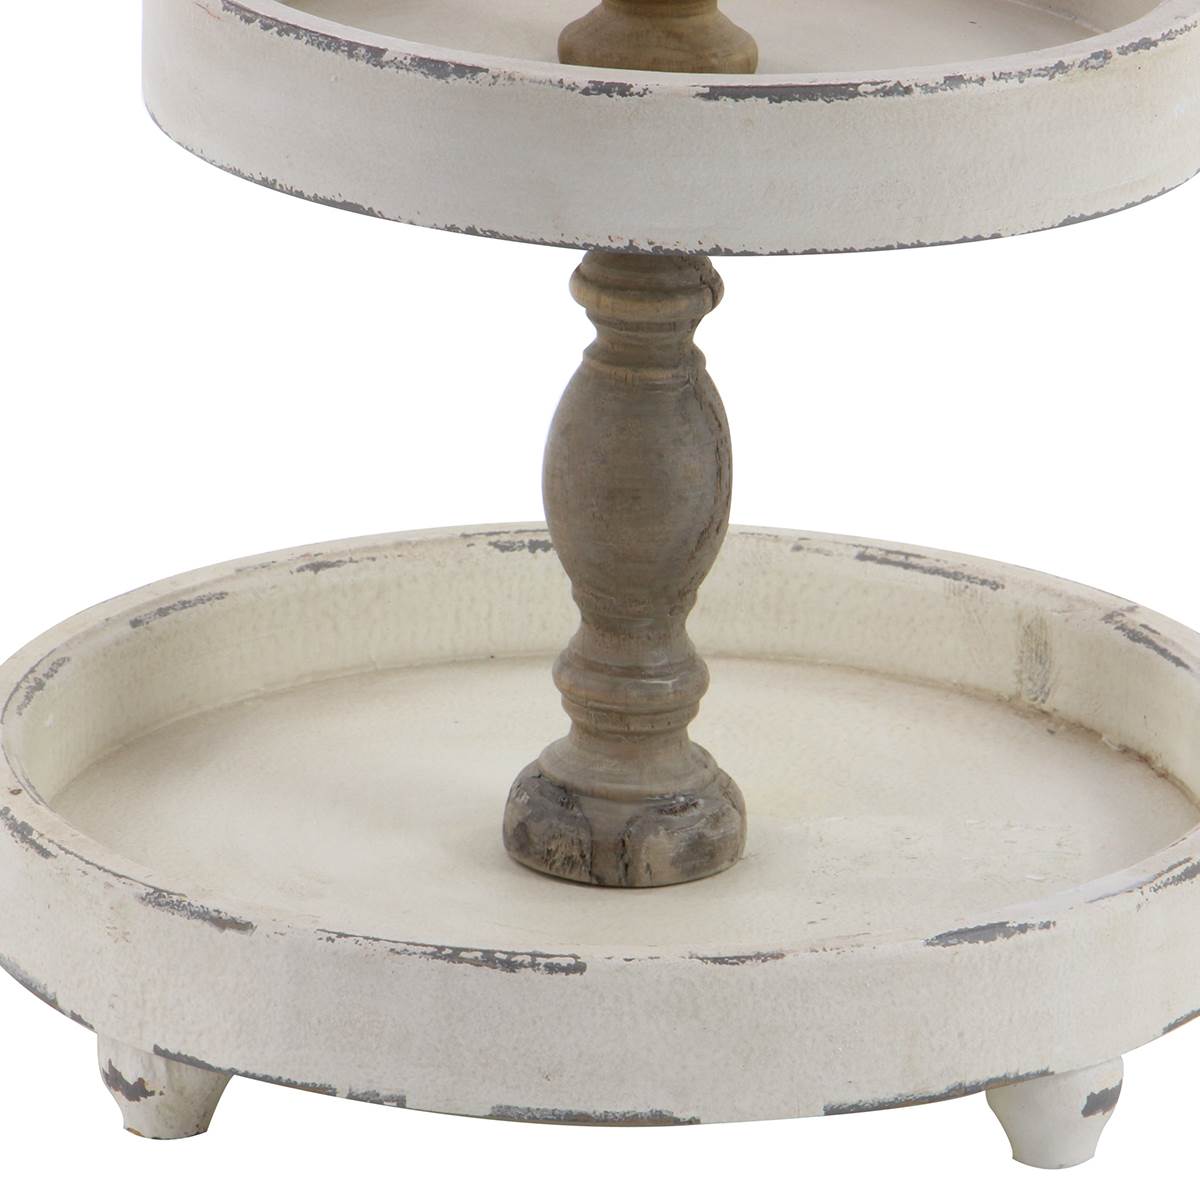 9th & Pike(R) 3 Tier White Round Events Serving Tray